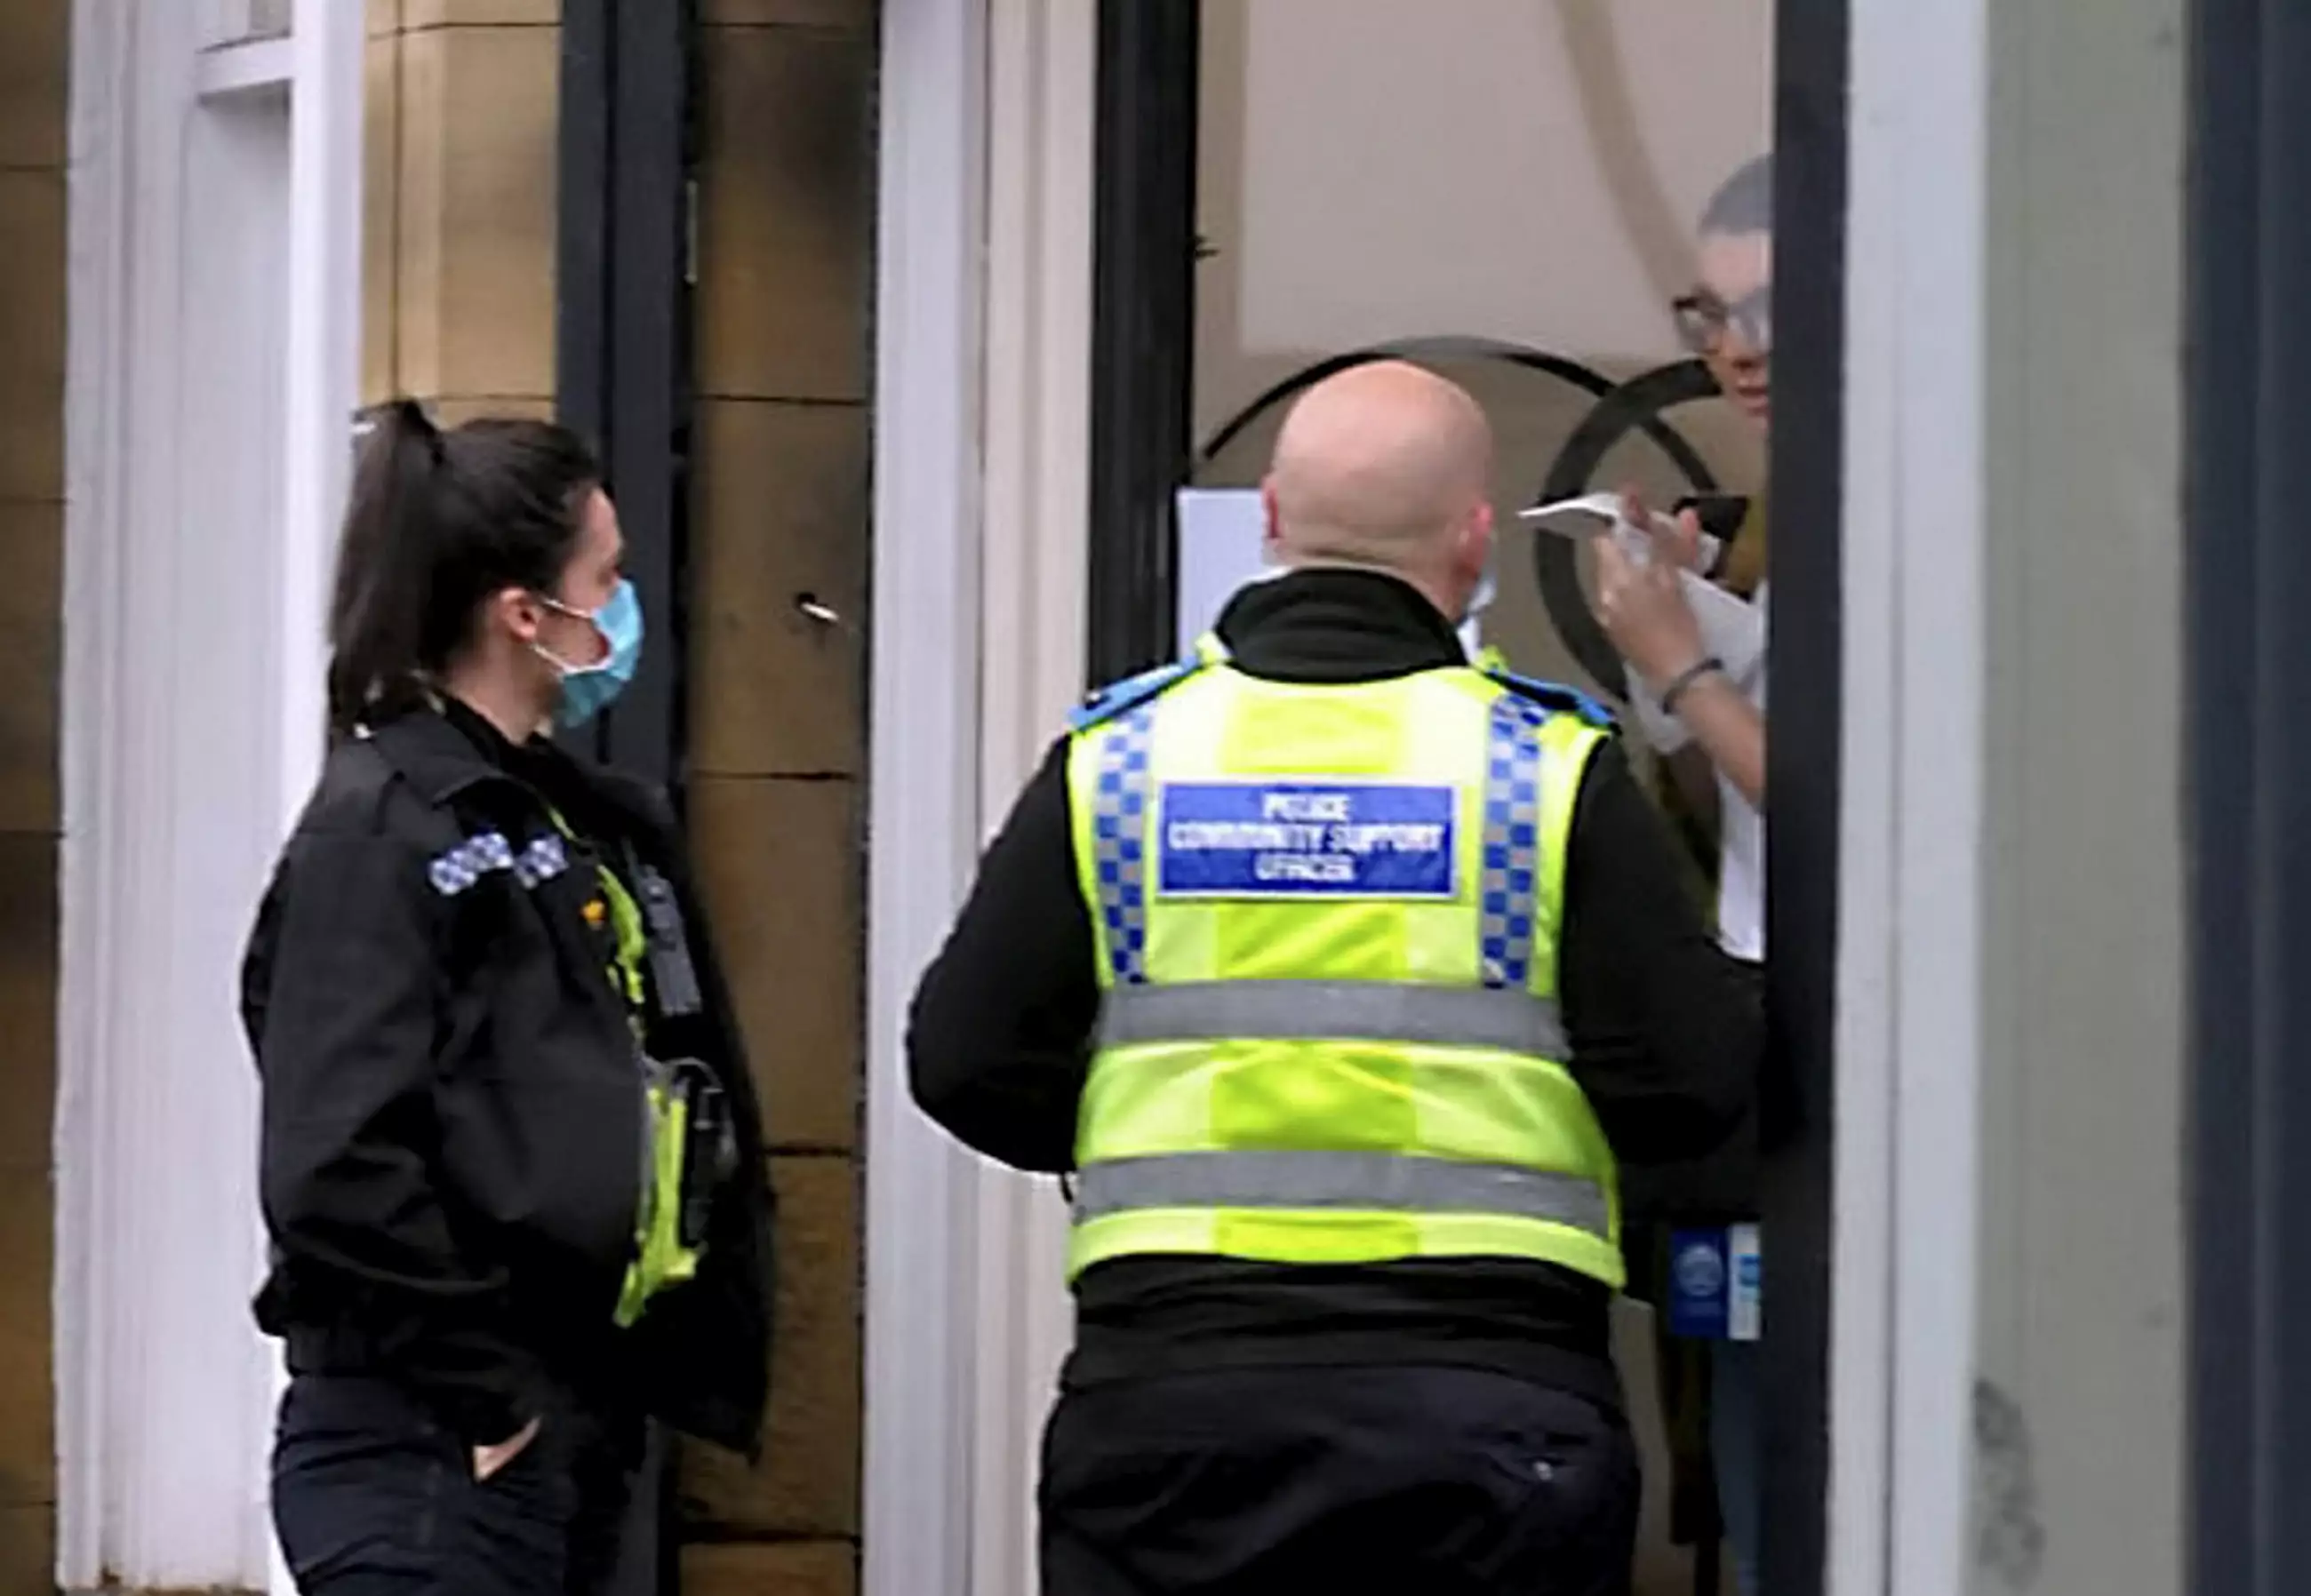 The salon has been hit with a £27,000 fine for flouting lockdown rules.